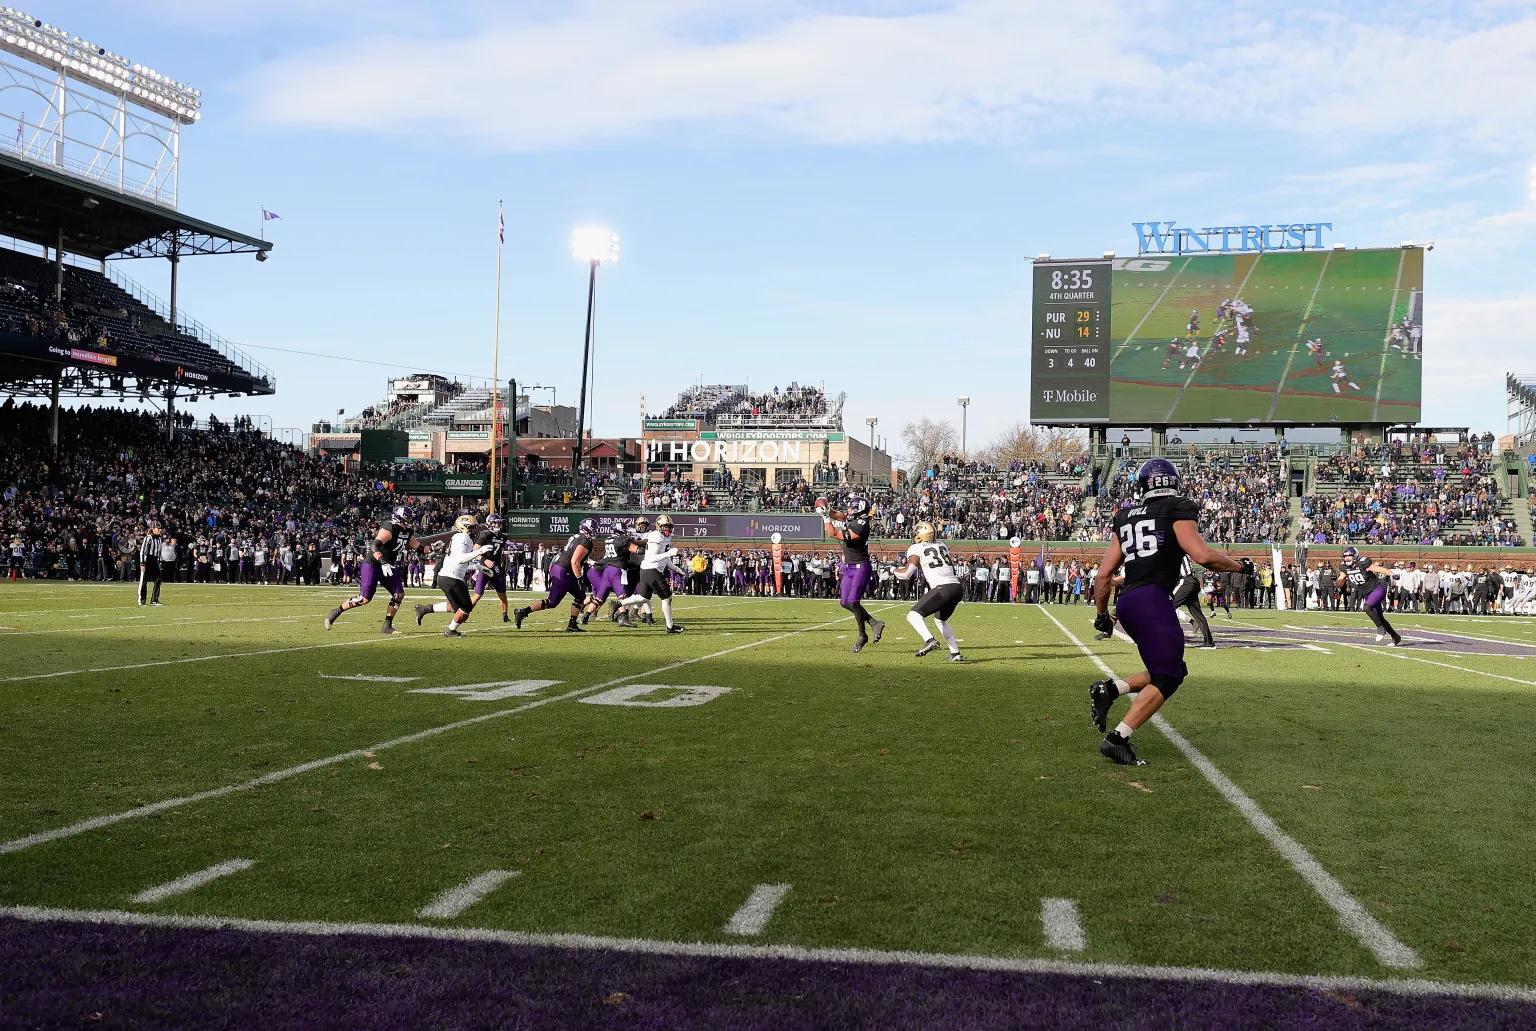 Wrigley Field to host another Big Ten Football game